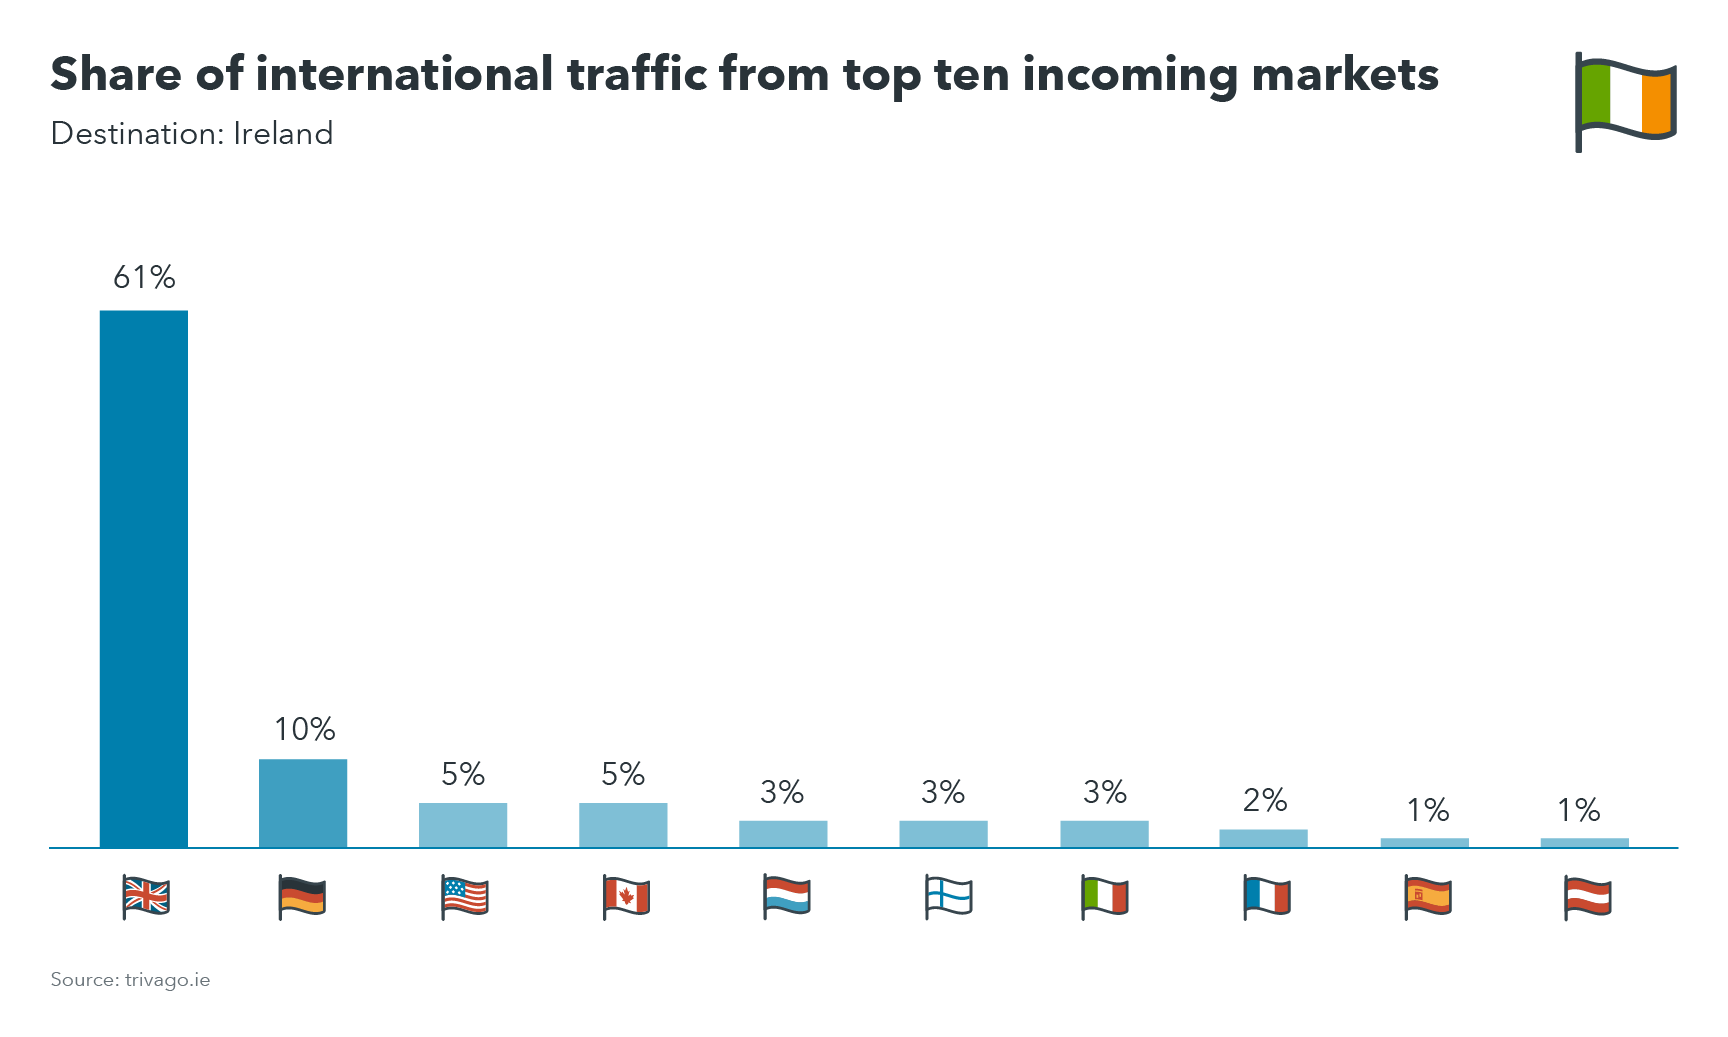 Chart showing share of international traffic from top ten incoming markets to Ireland destinations